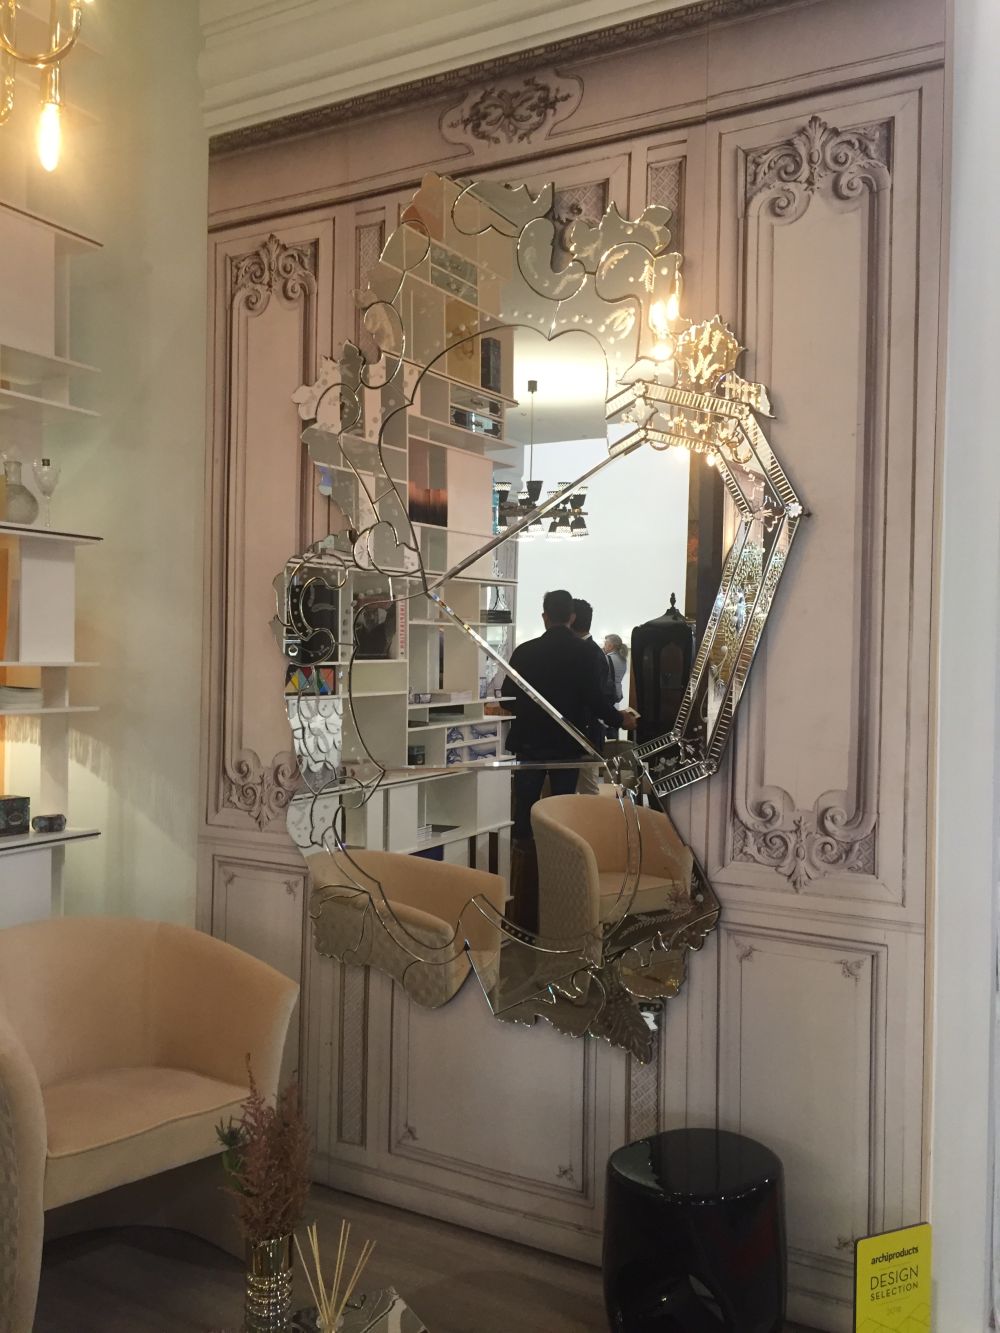 Decorative large mirror on the wall